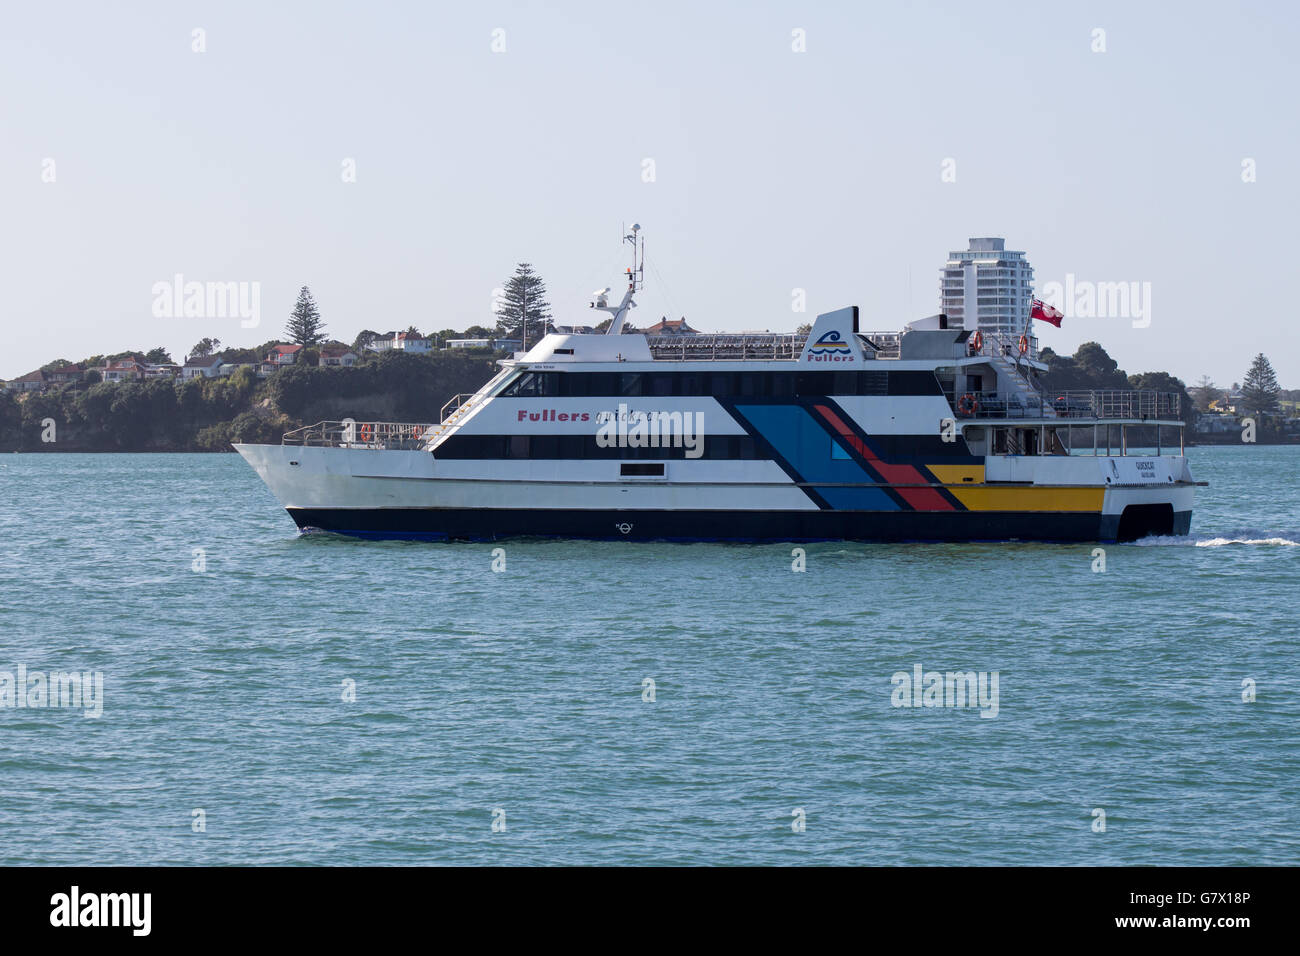 Fullers Auckland Waiheke Ferry Quickcat Stock Photo